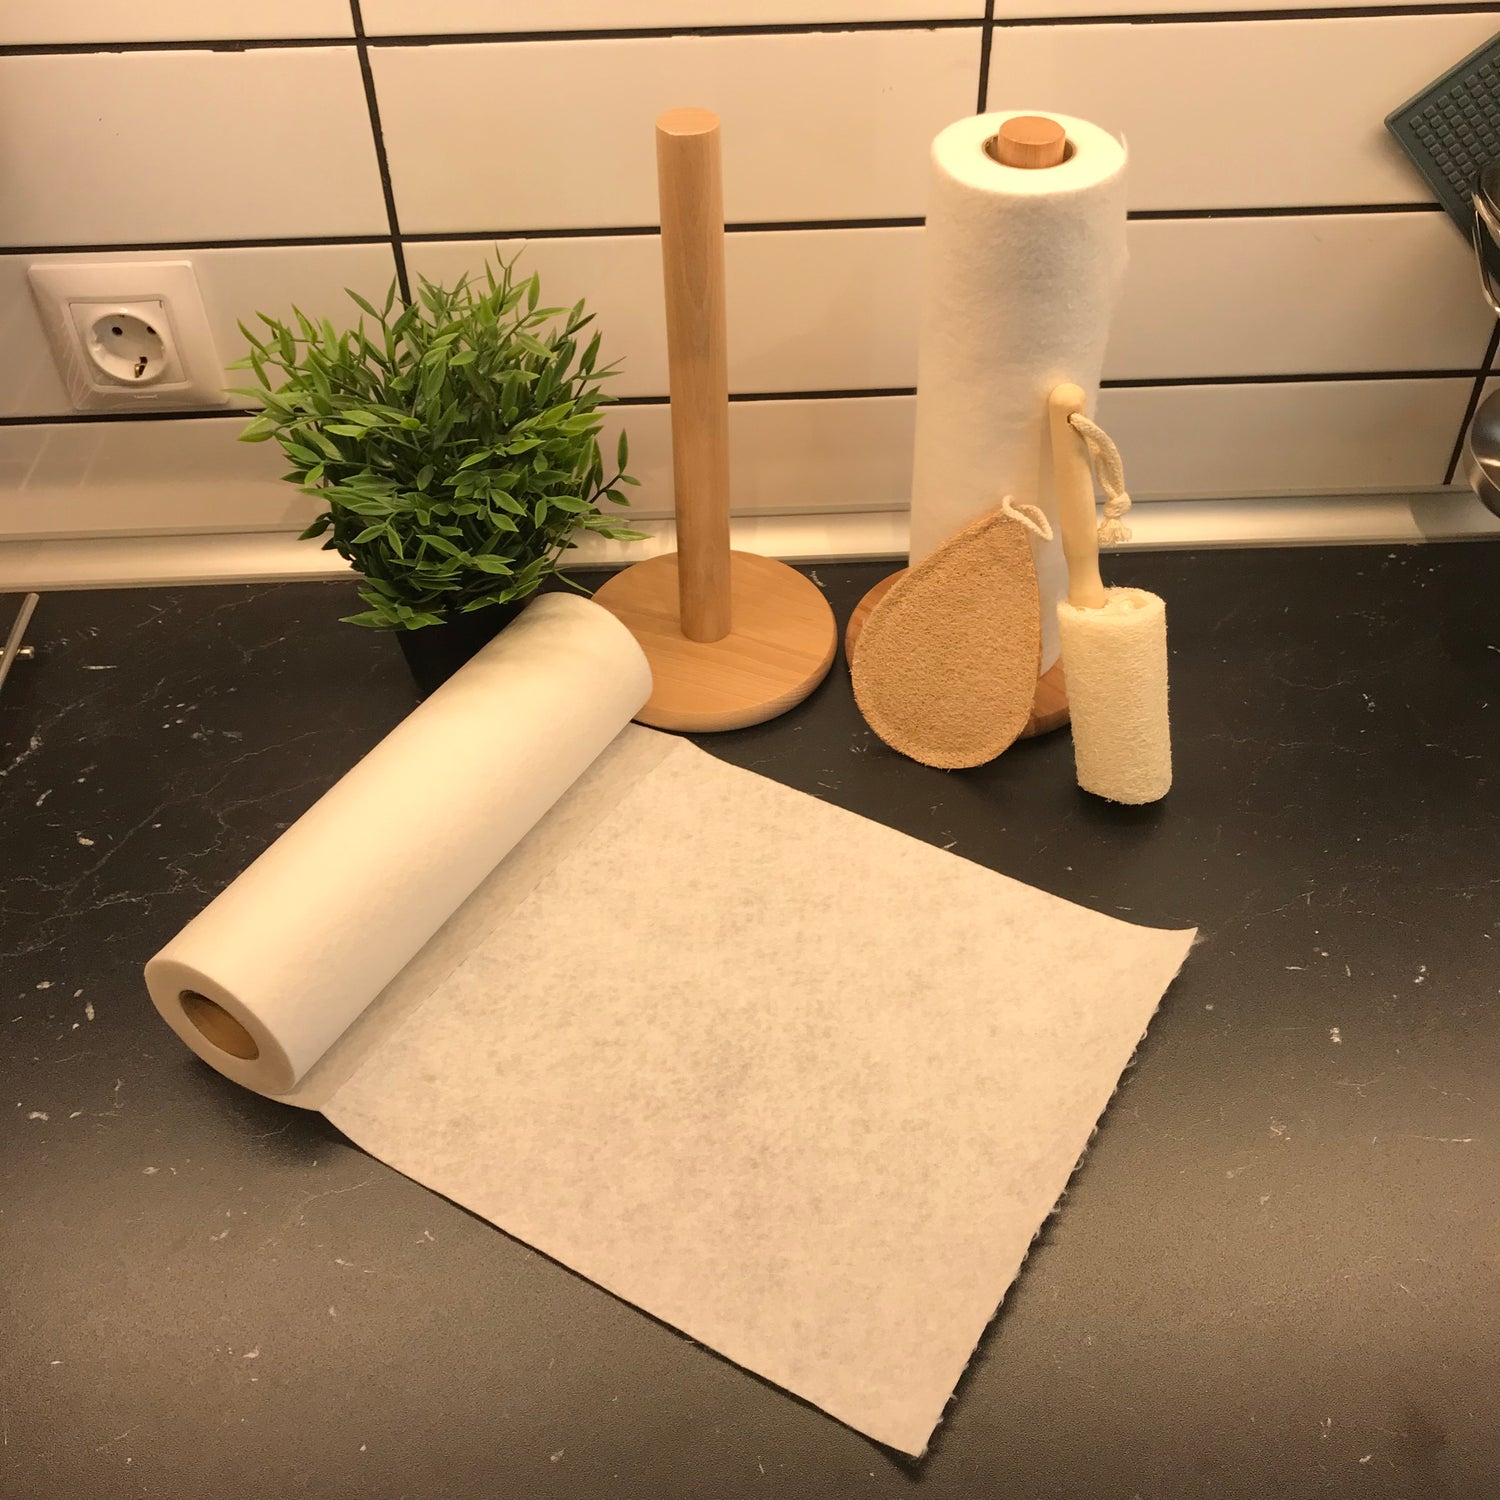 Reusable paper towels & Loofah sponges for cleaning, dishwashing. Green cleaning for your kitchen and home.